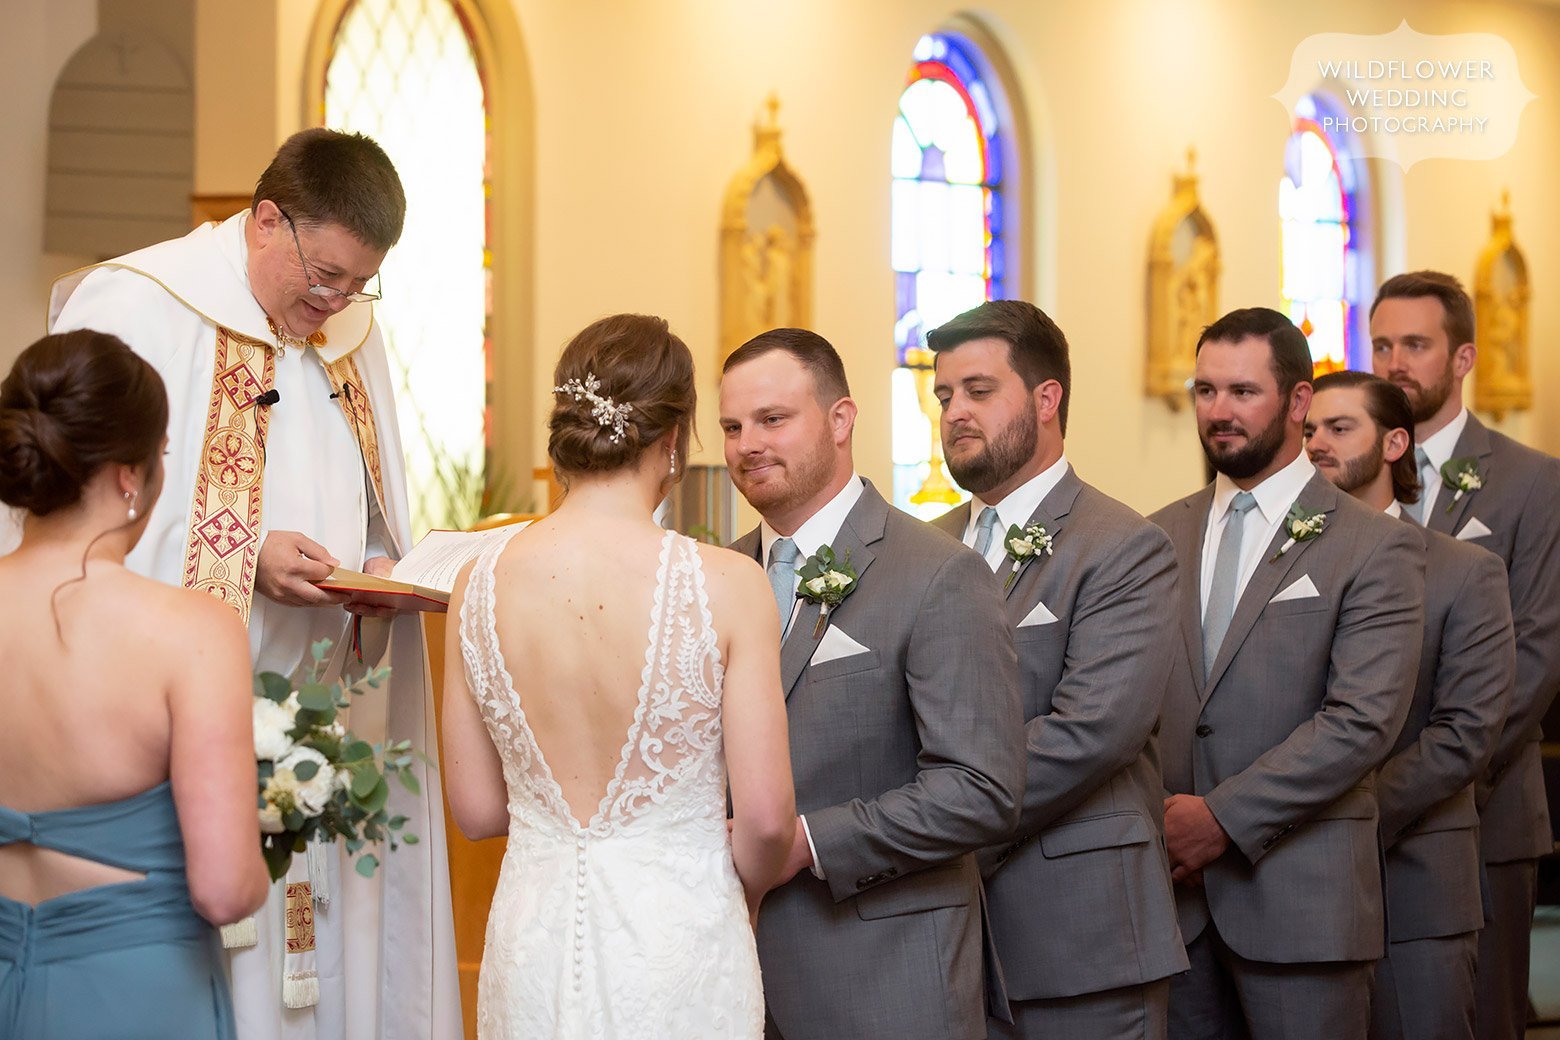 Groom reads vows to bride in church in Mid-MO.